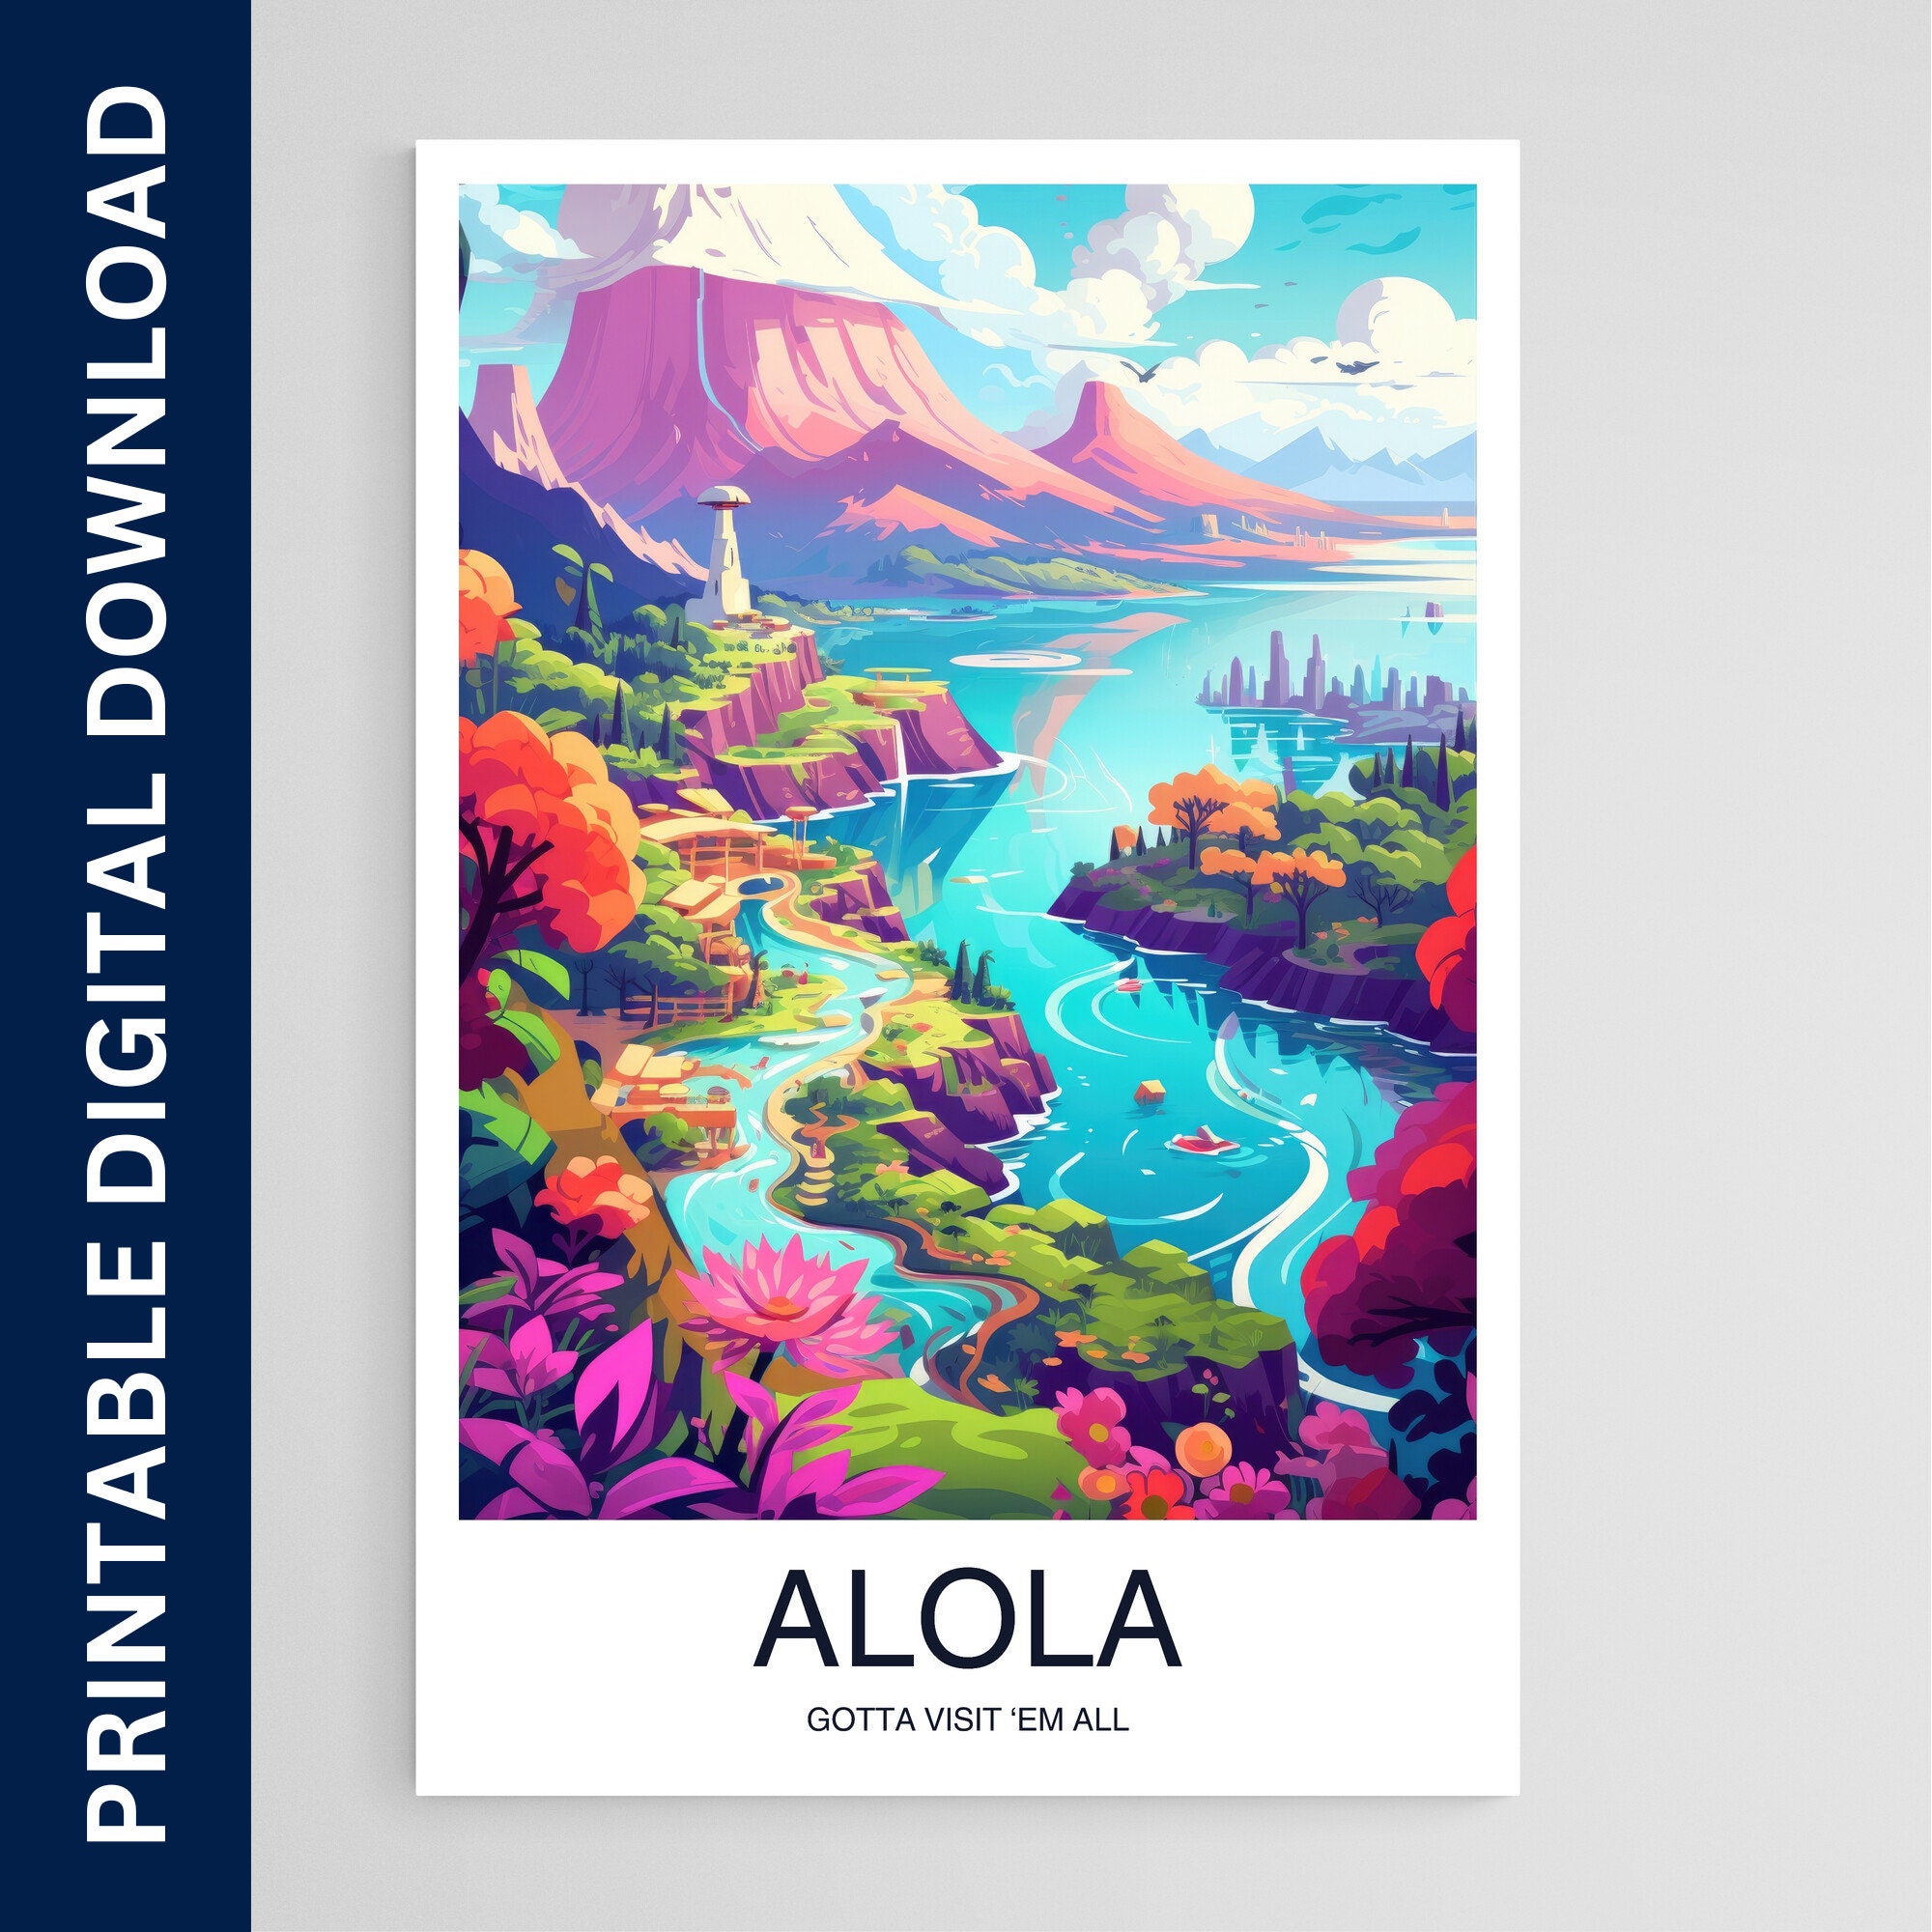 Pokemon Alola Region Video Game Gaming Cool Wall Decor Art Print Poster  22x34 - Poster Foundry